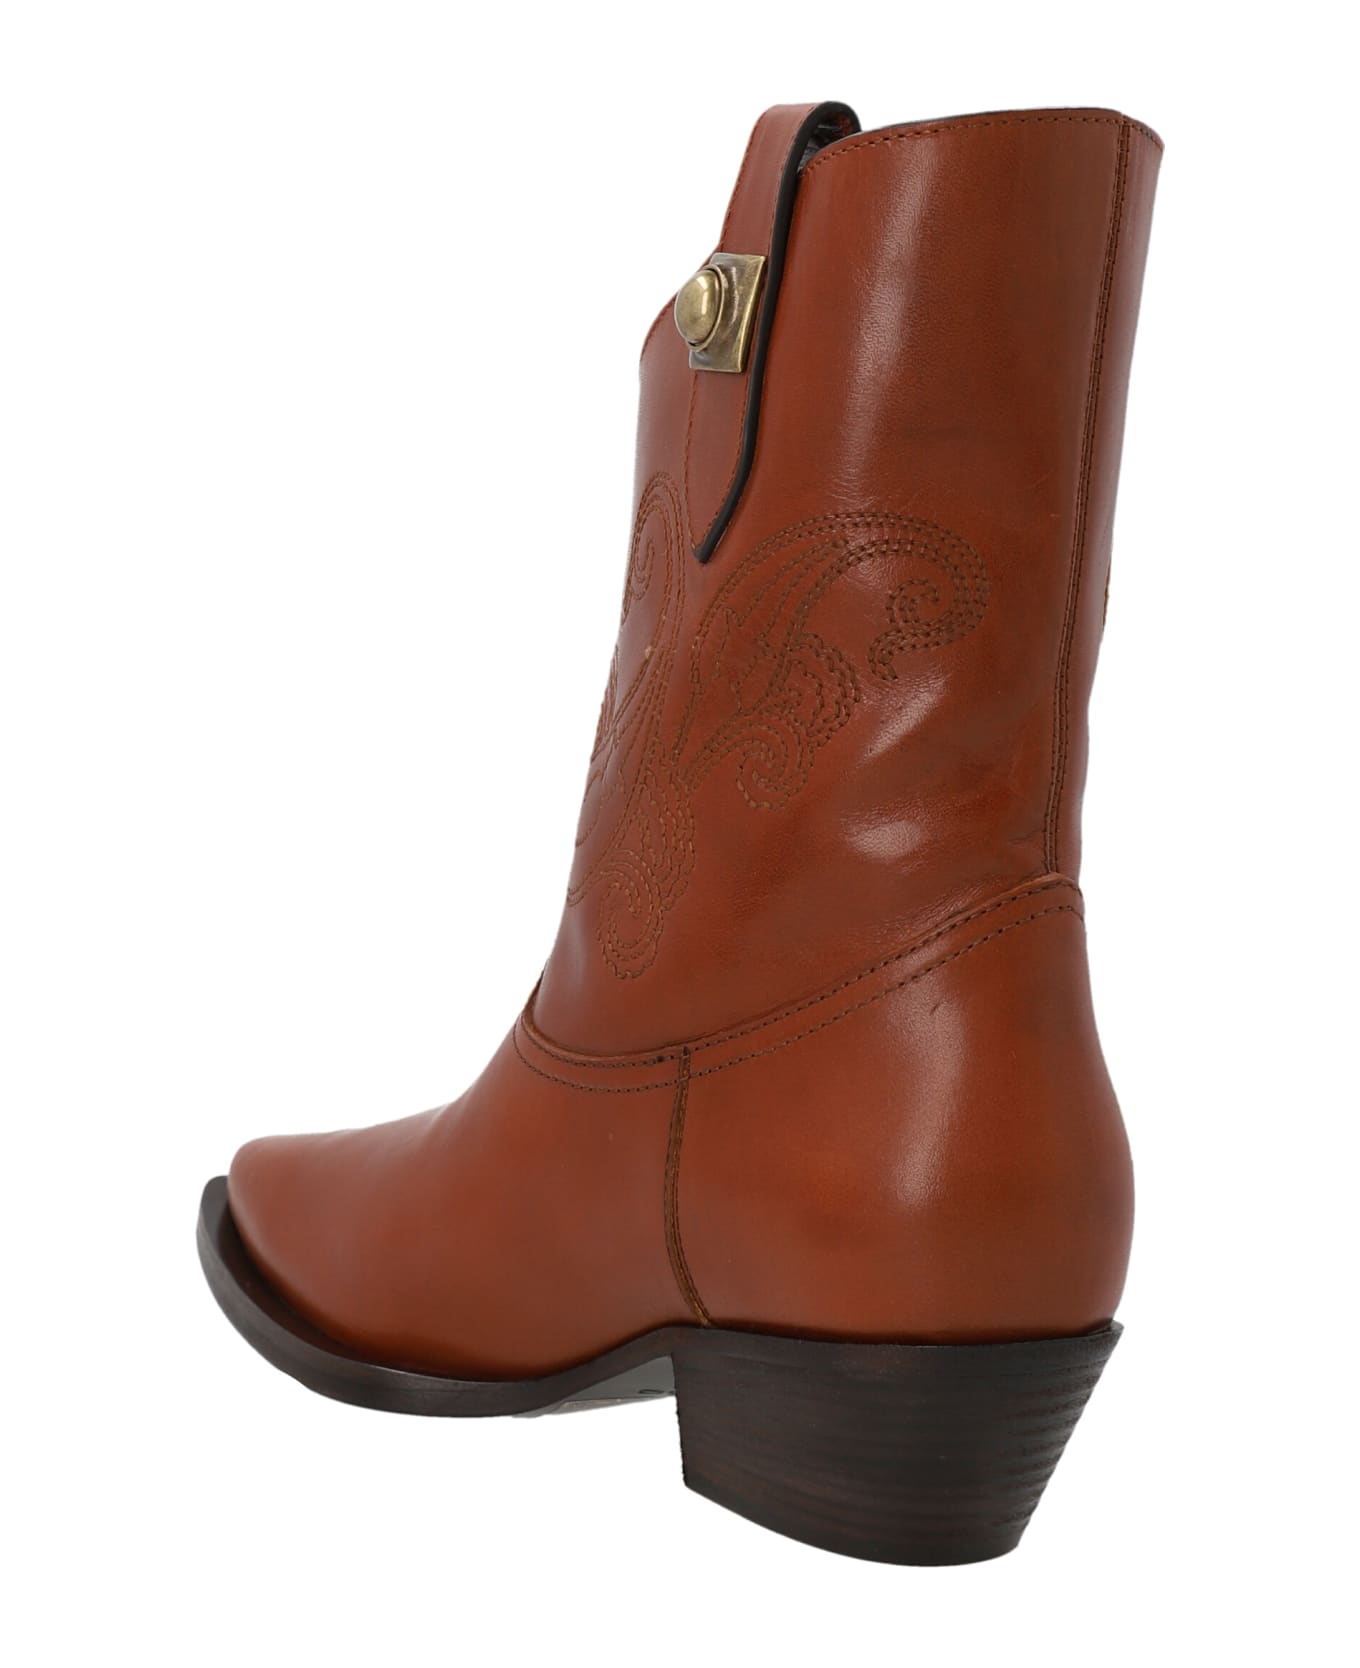 Etro Texan Ankle Boots - BROWN